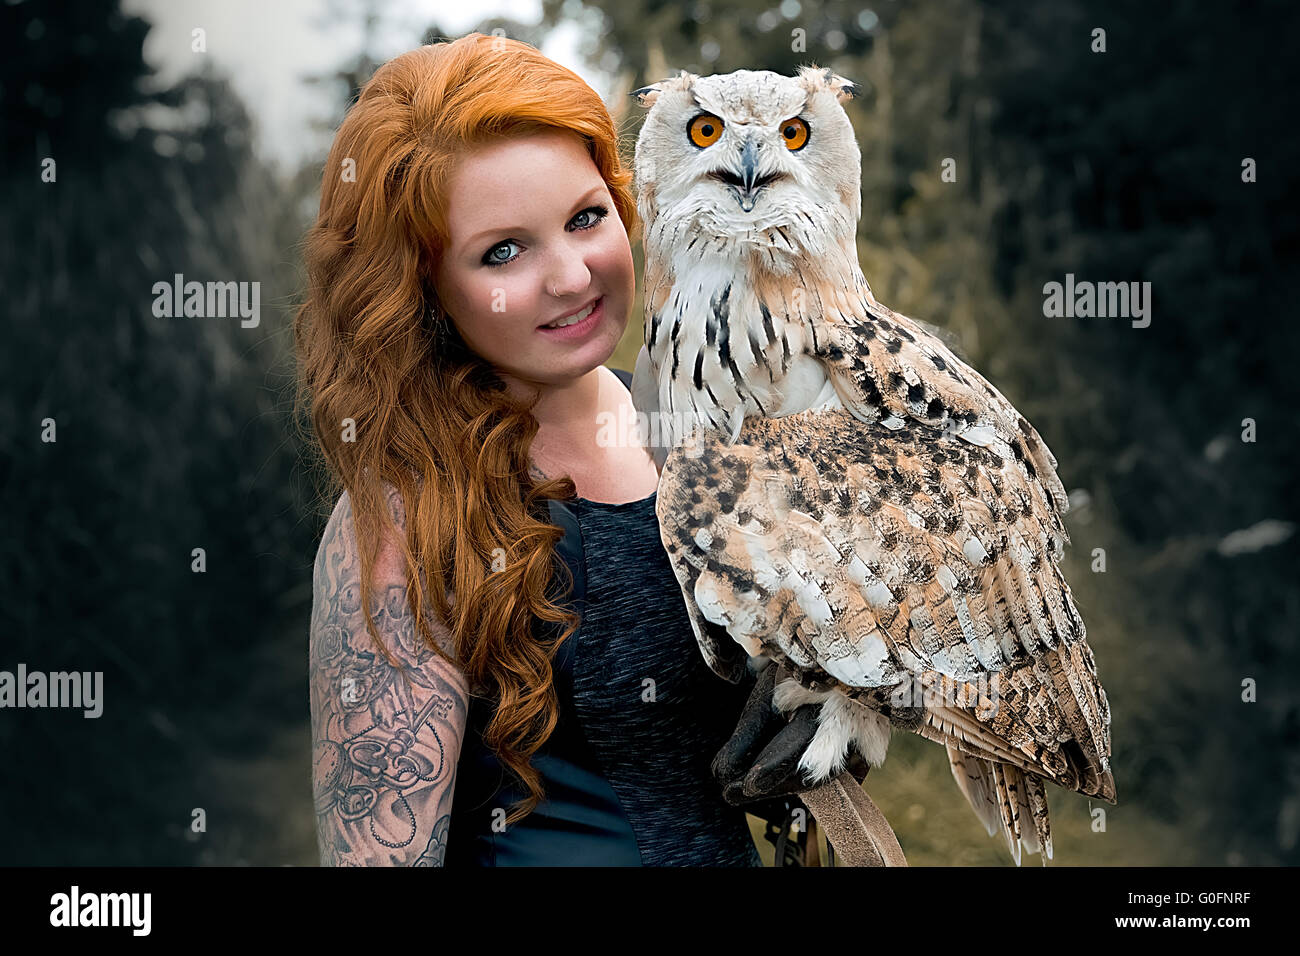 The owl with the lady Stock Photo